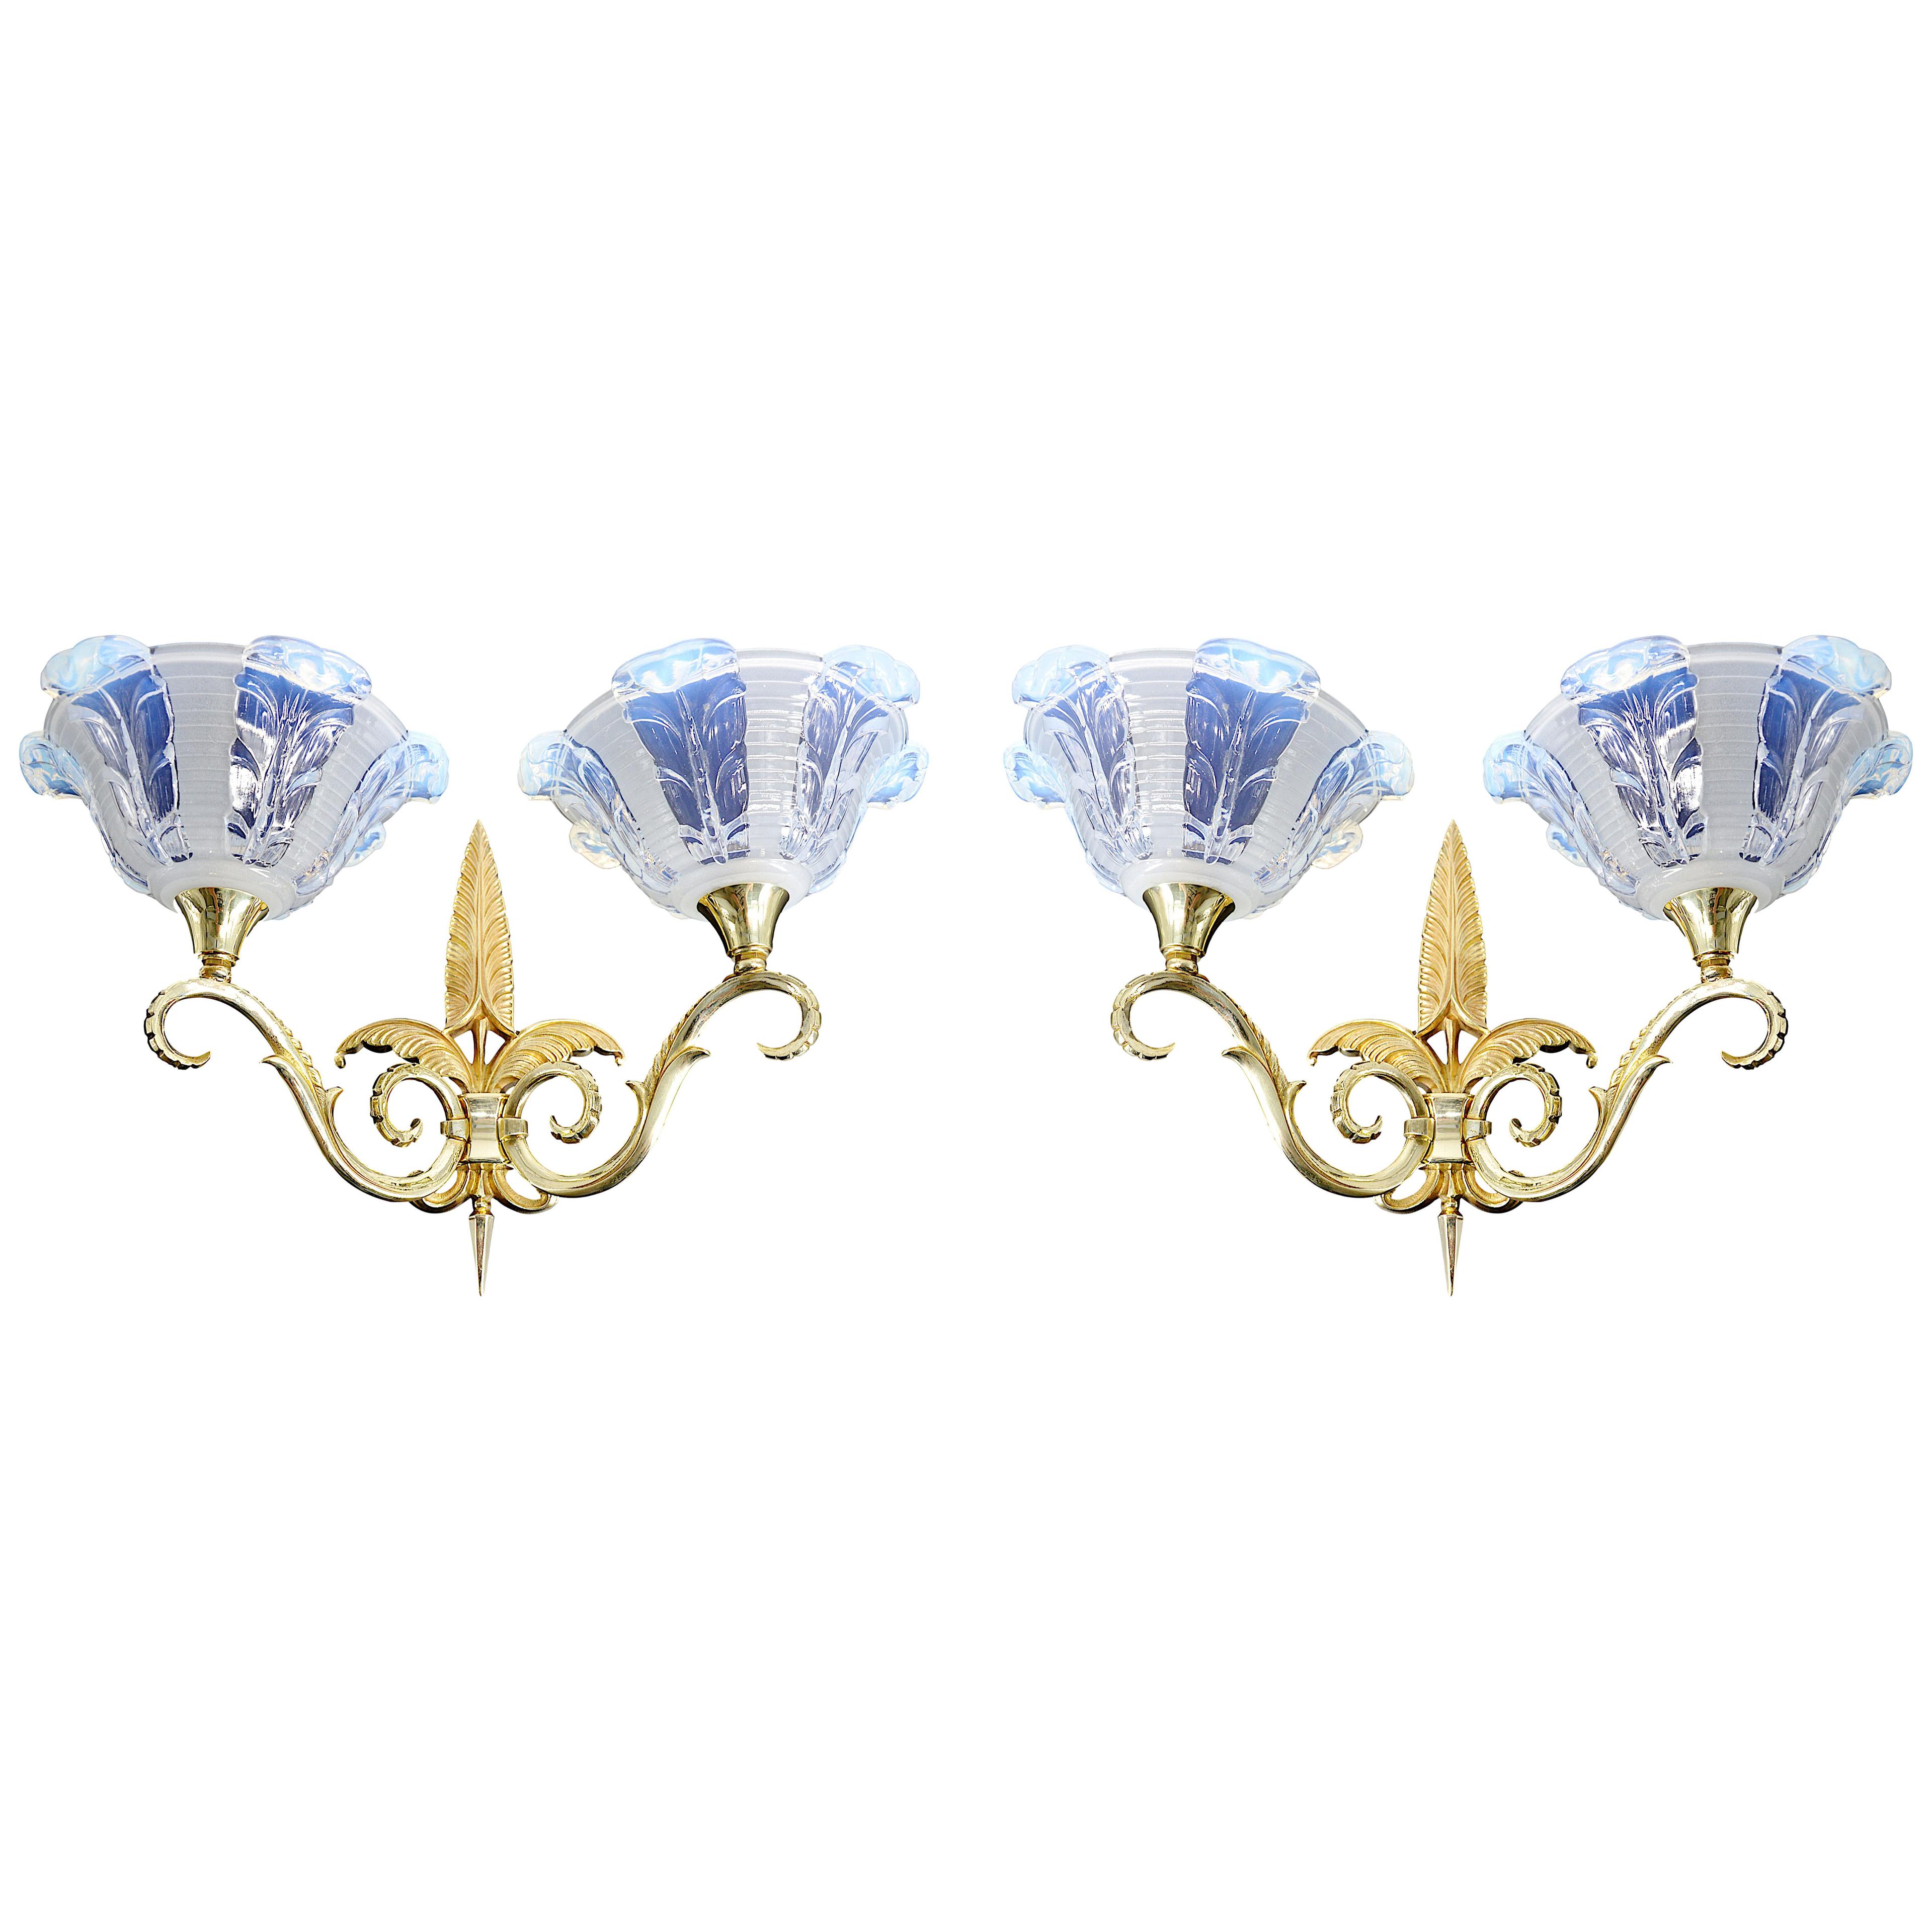 Jean Gauthier French Art Deco Pair of Double Wall Sconces, 1920s